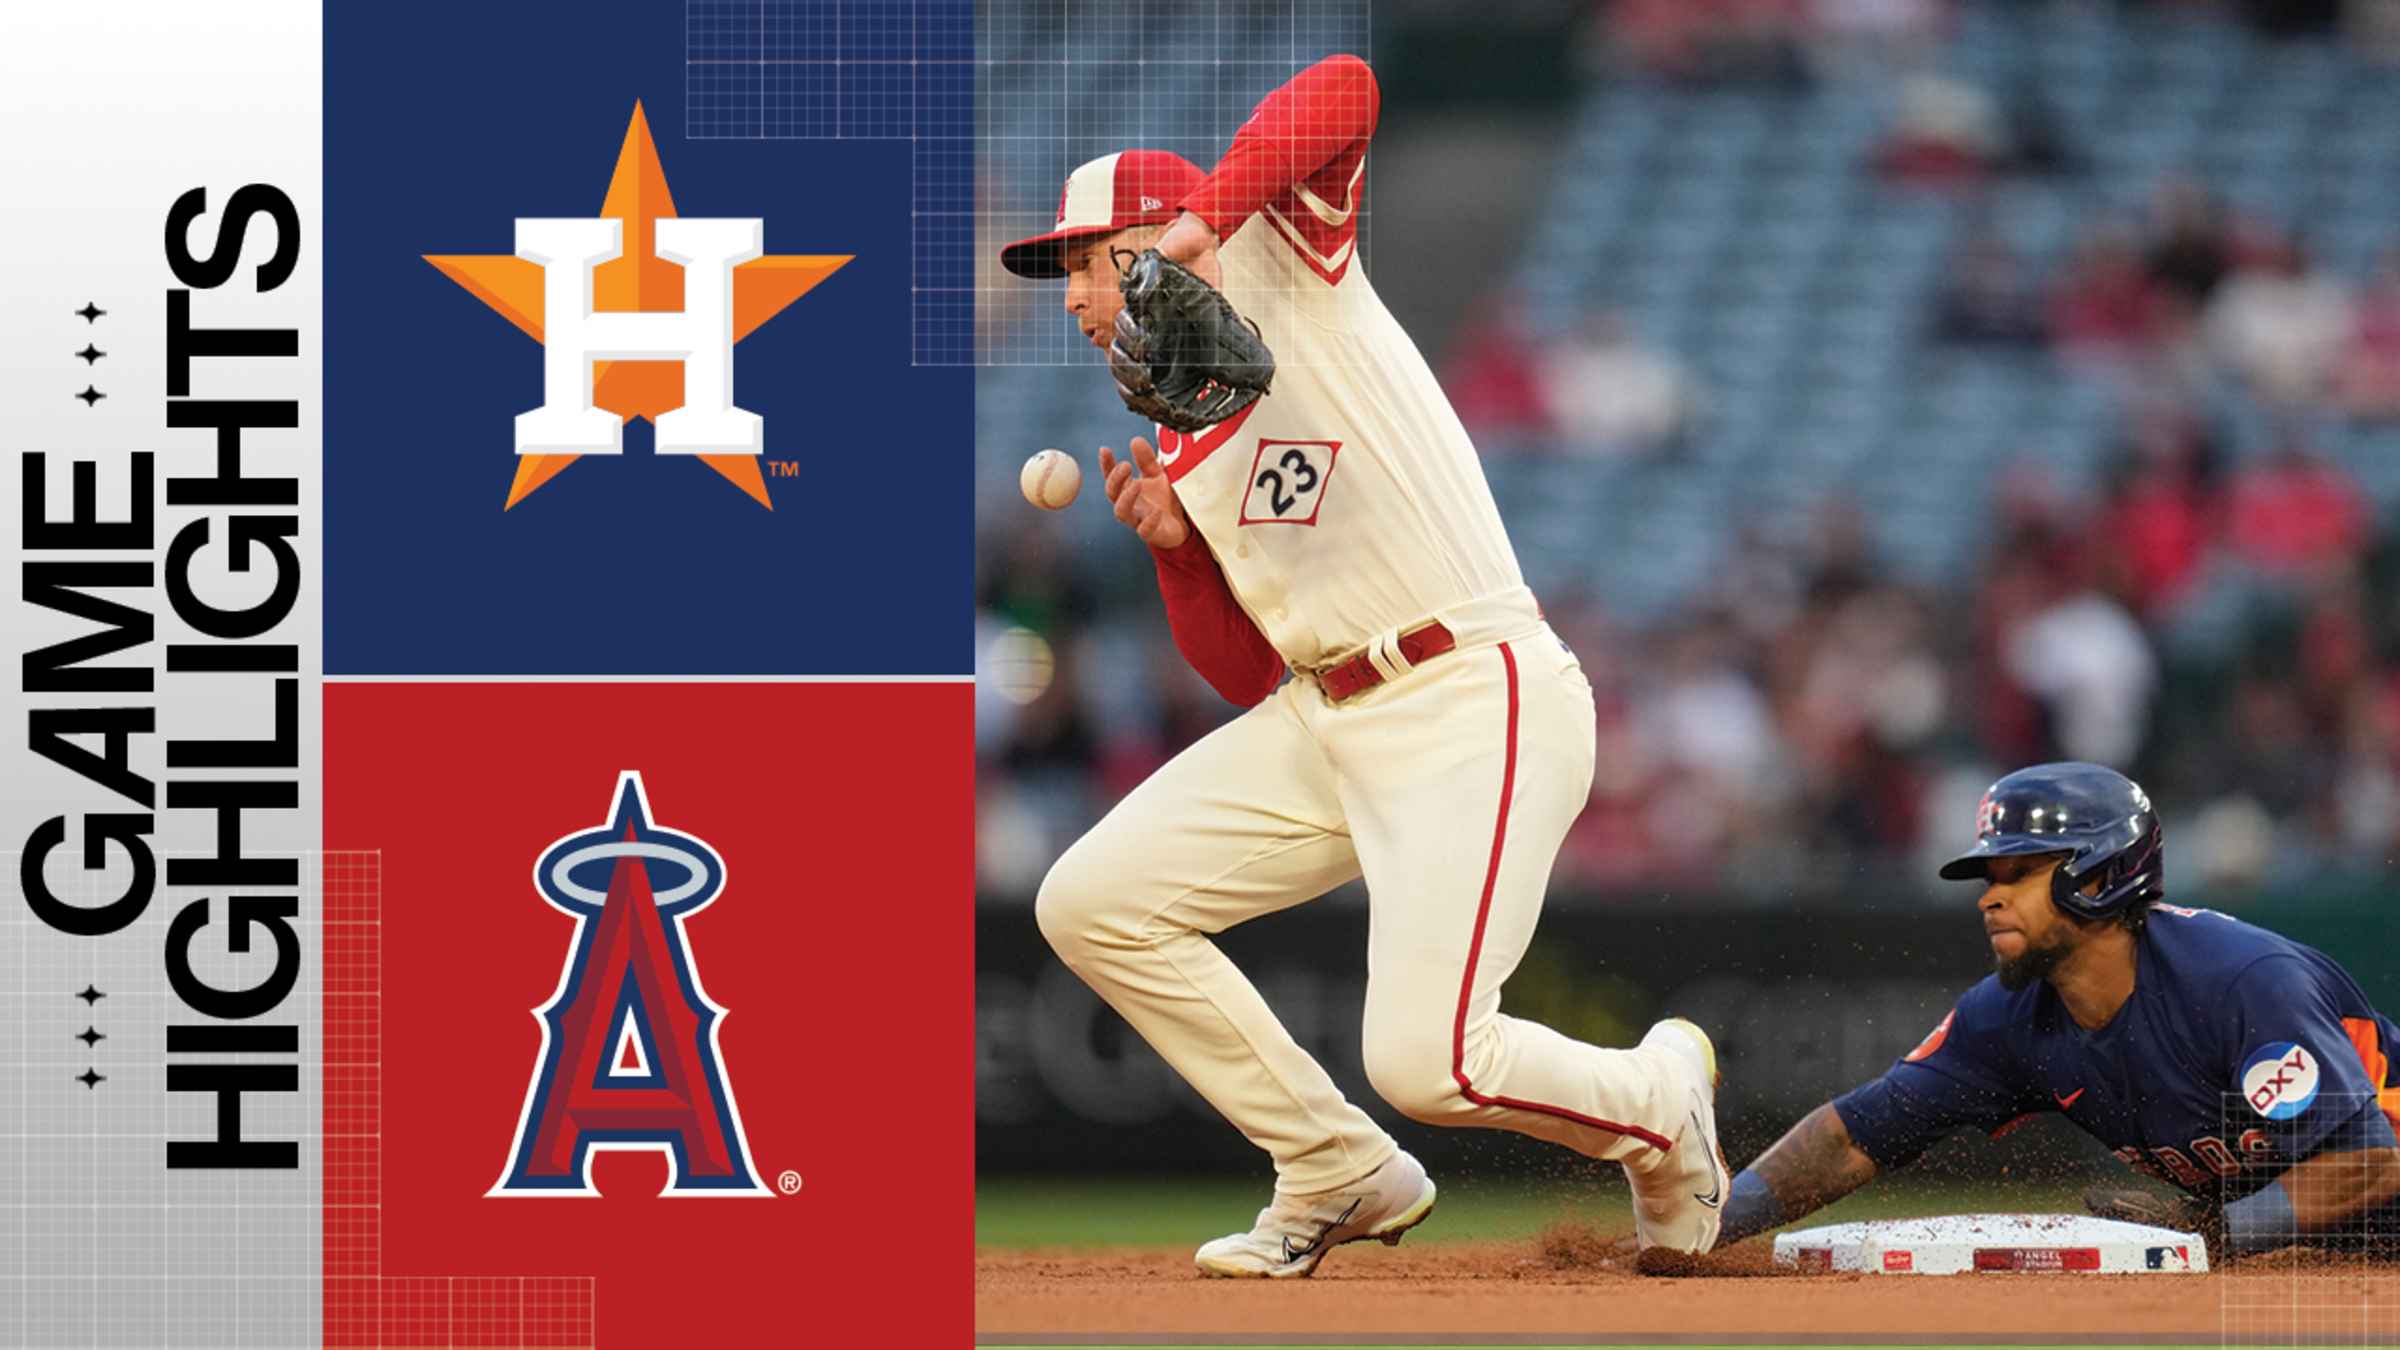 Los Angeles Angels vs Houston Astros - MLB Today Full Game highlights  4/20/22 - MLB The Show 22 